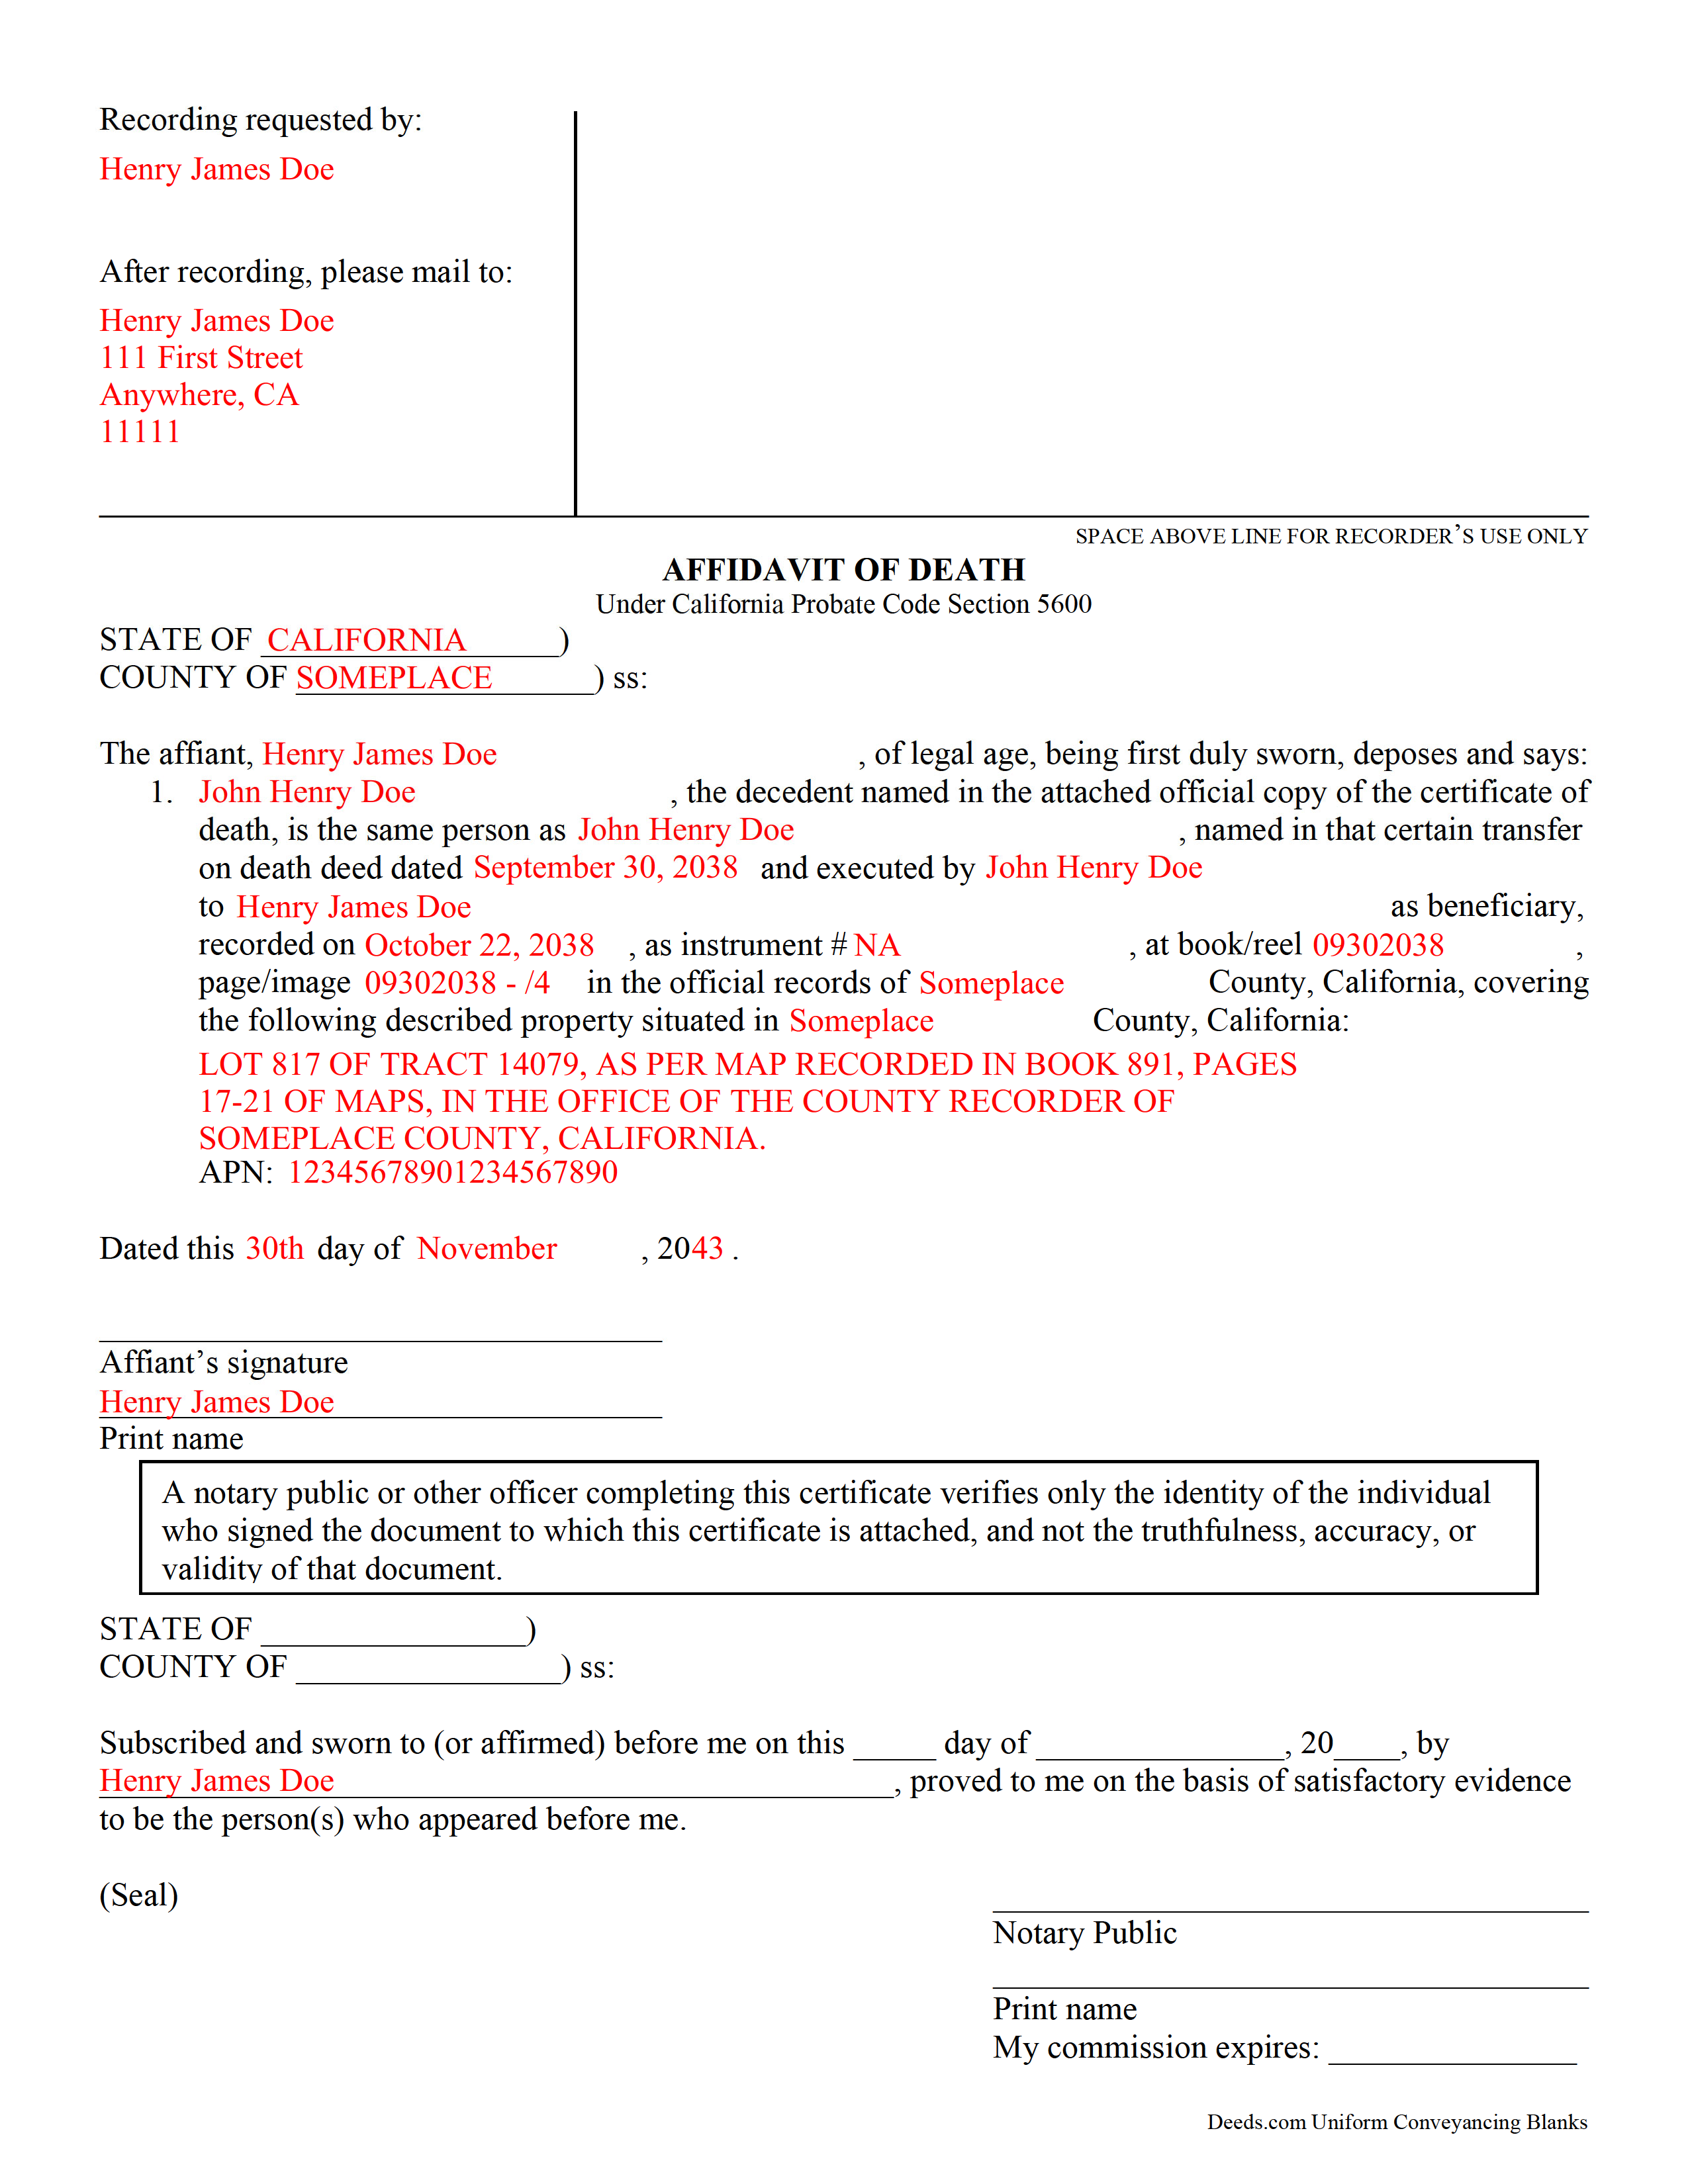 Completed Example of the Transfer on Death Affidavit Document